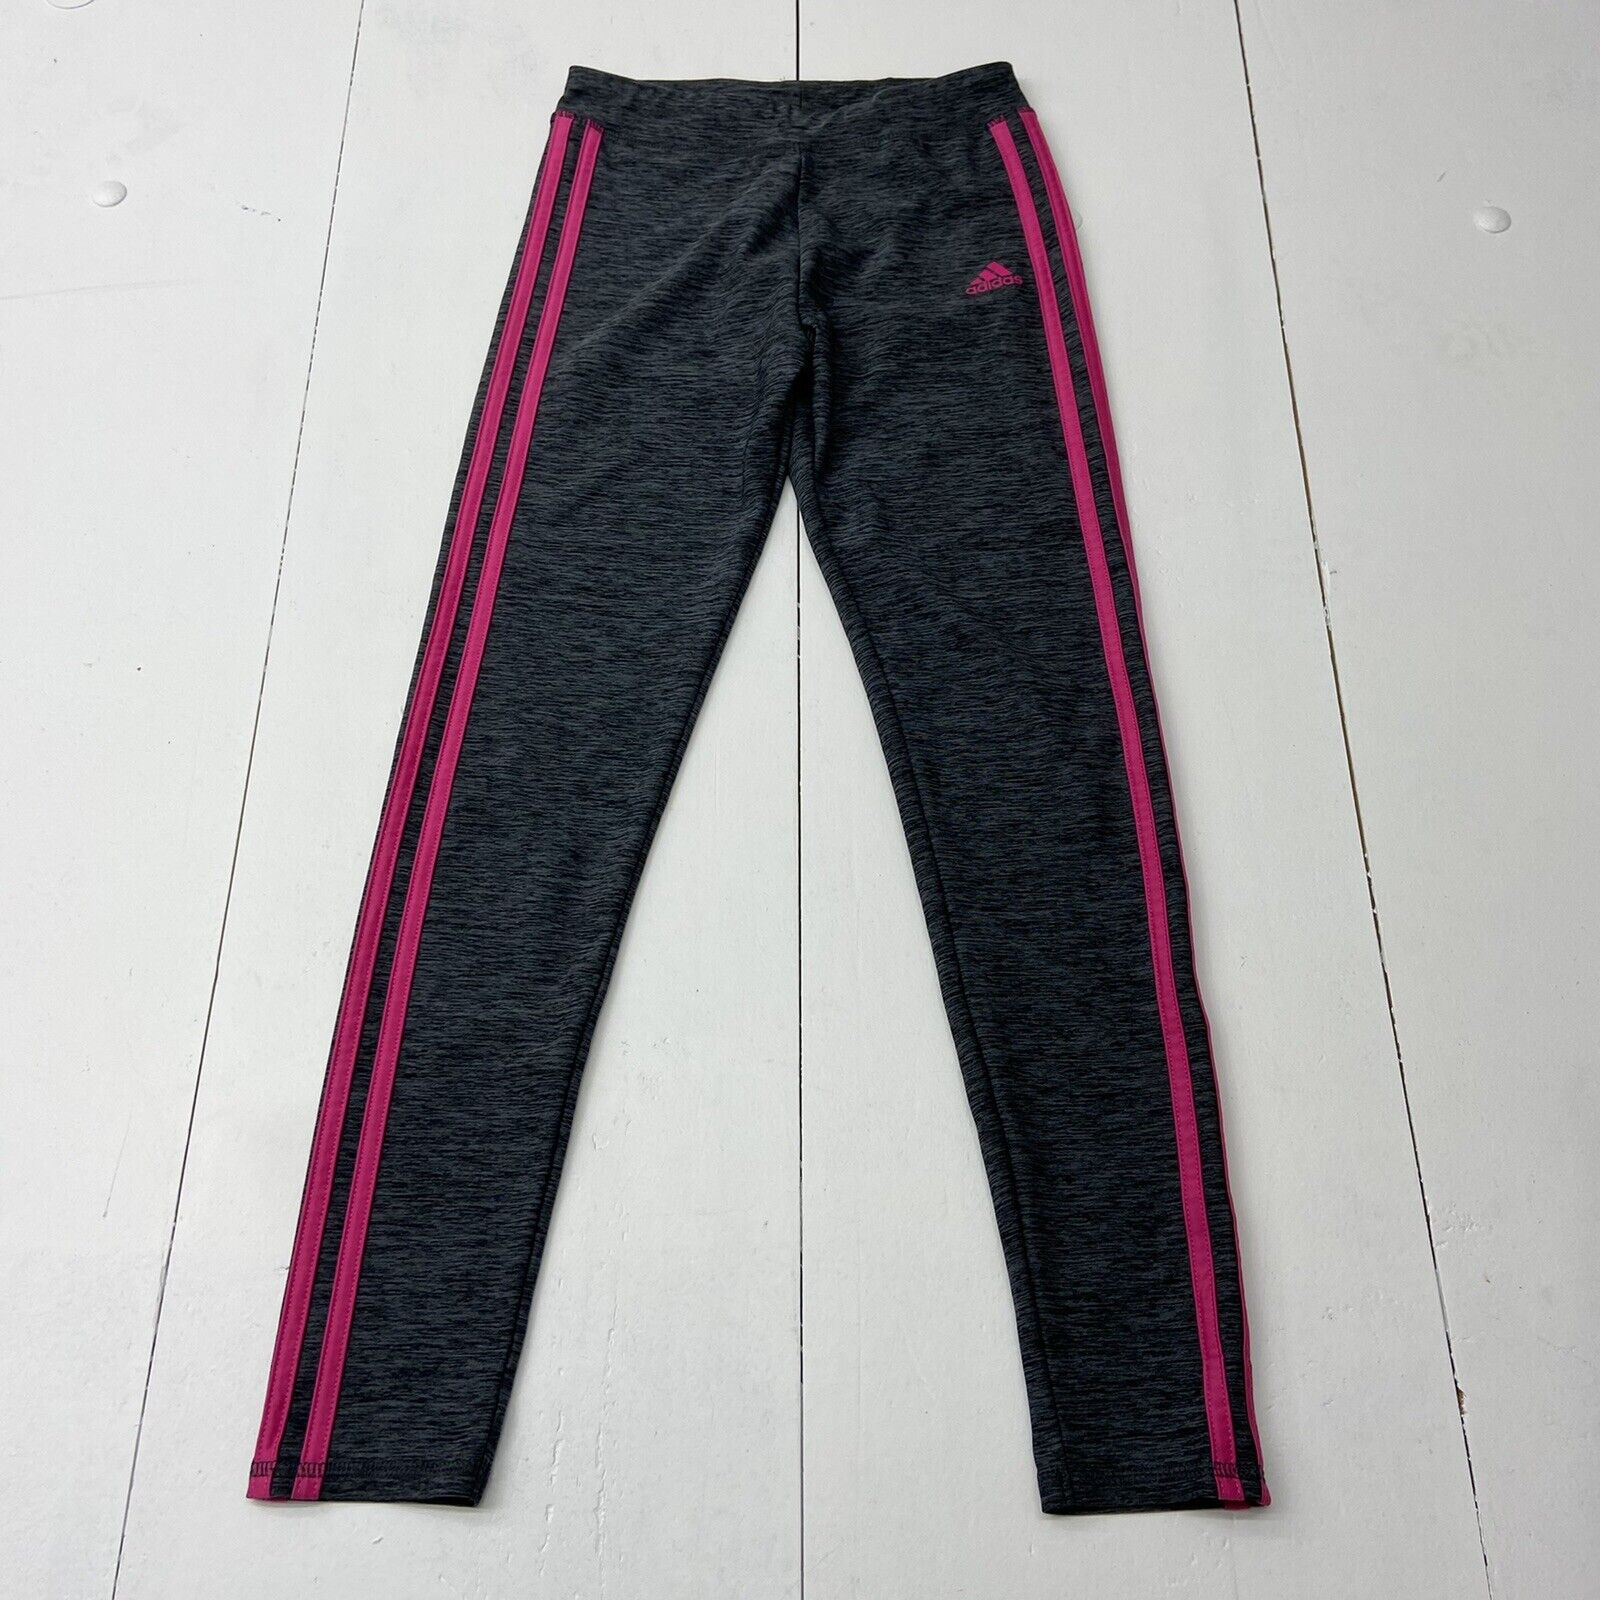 Adidas Gray Pink Piping Athletic Leggings Pants Youth Girls Size Large